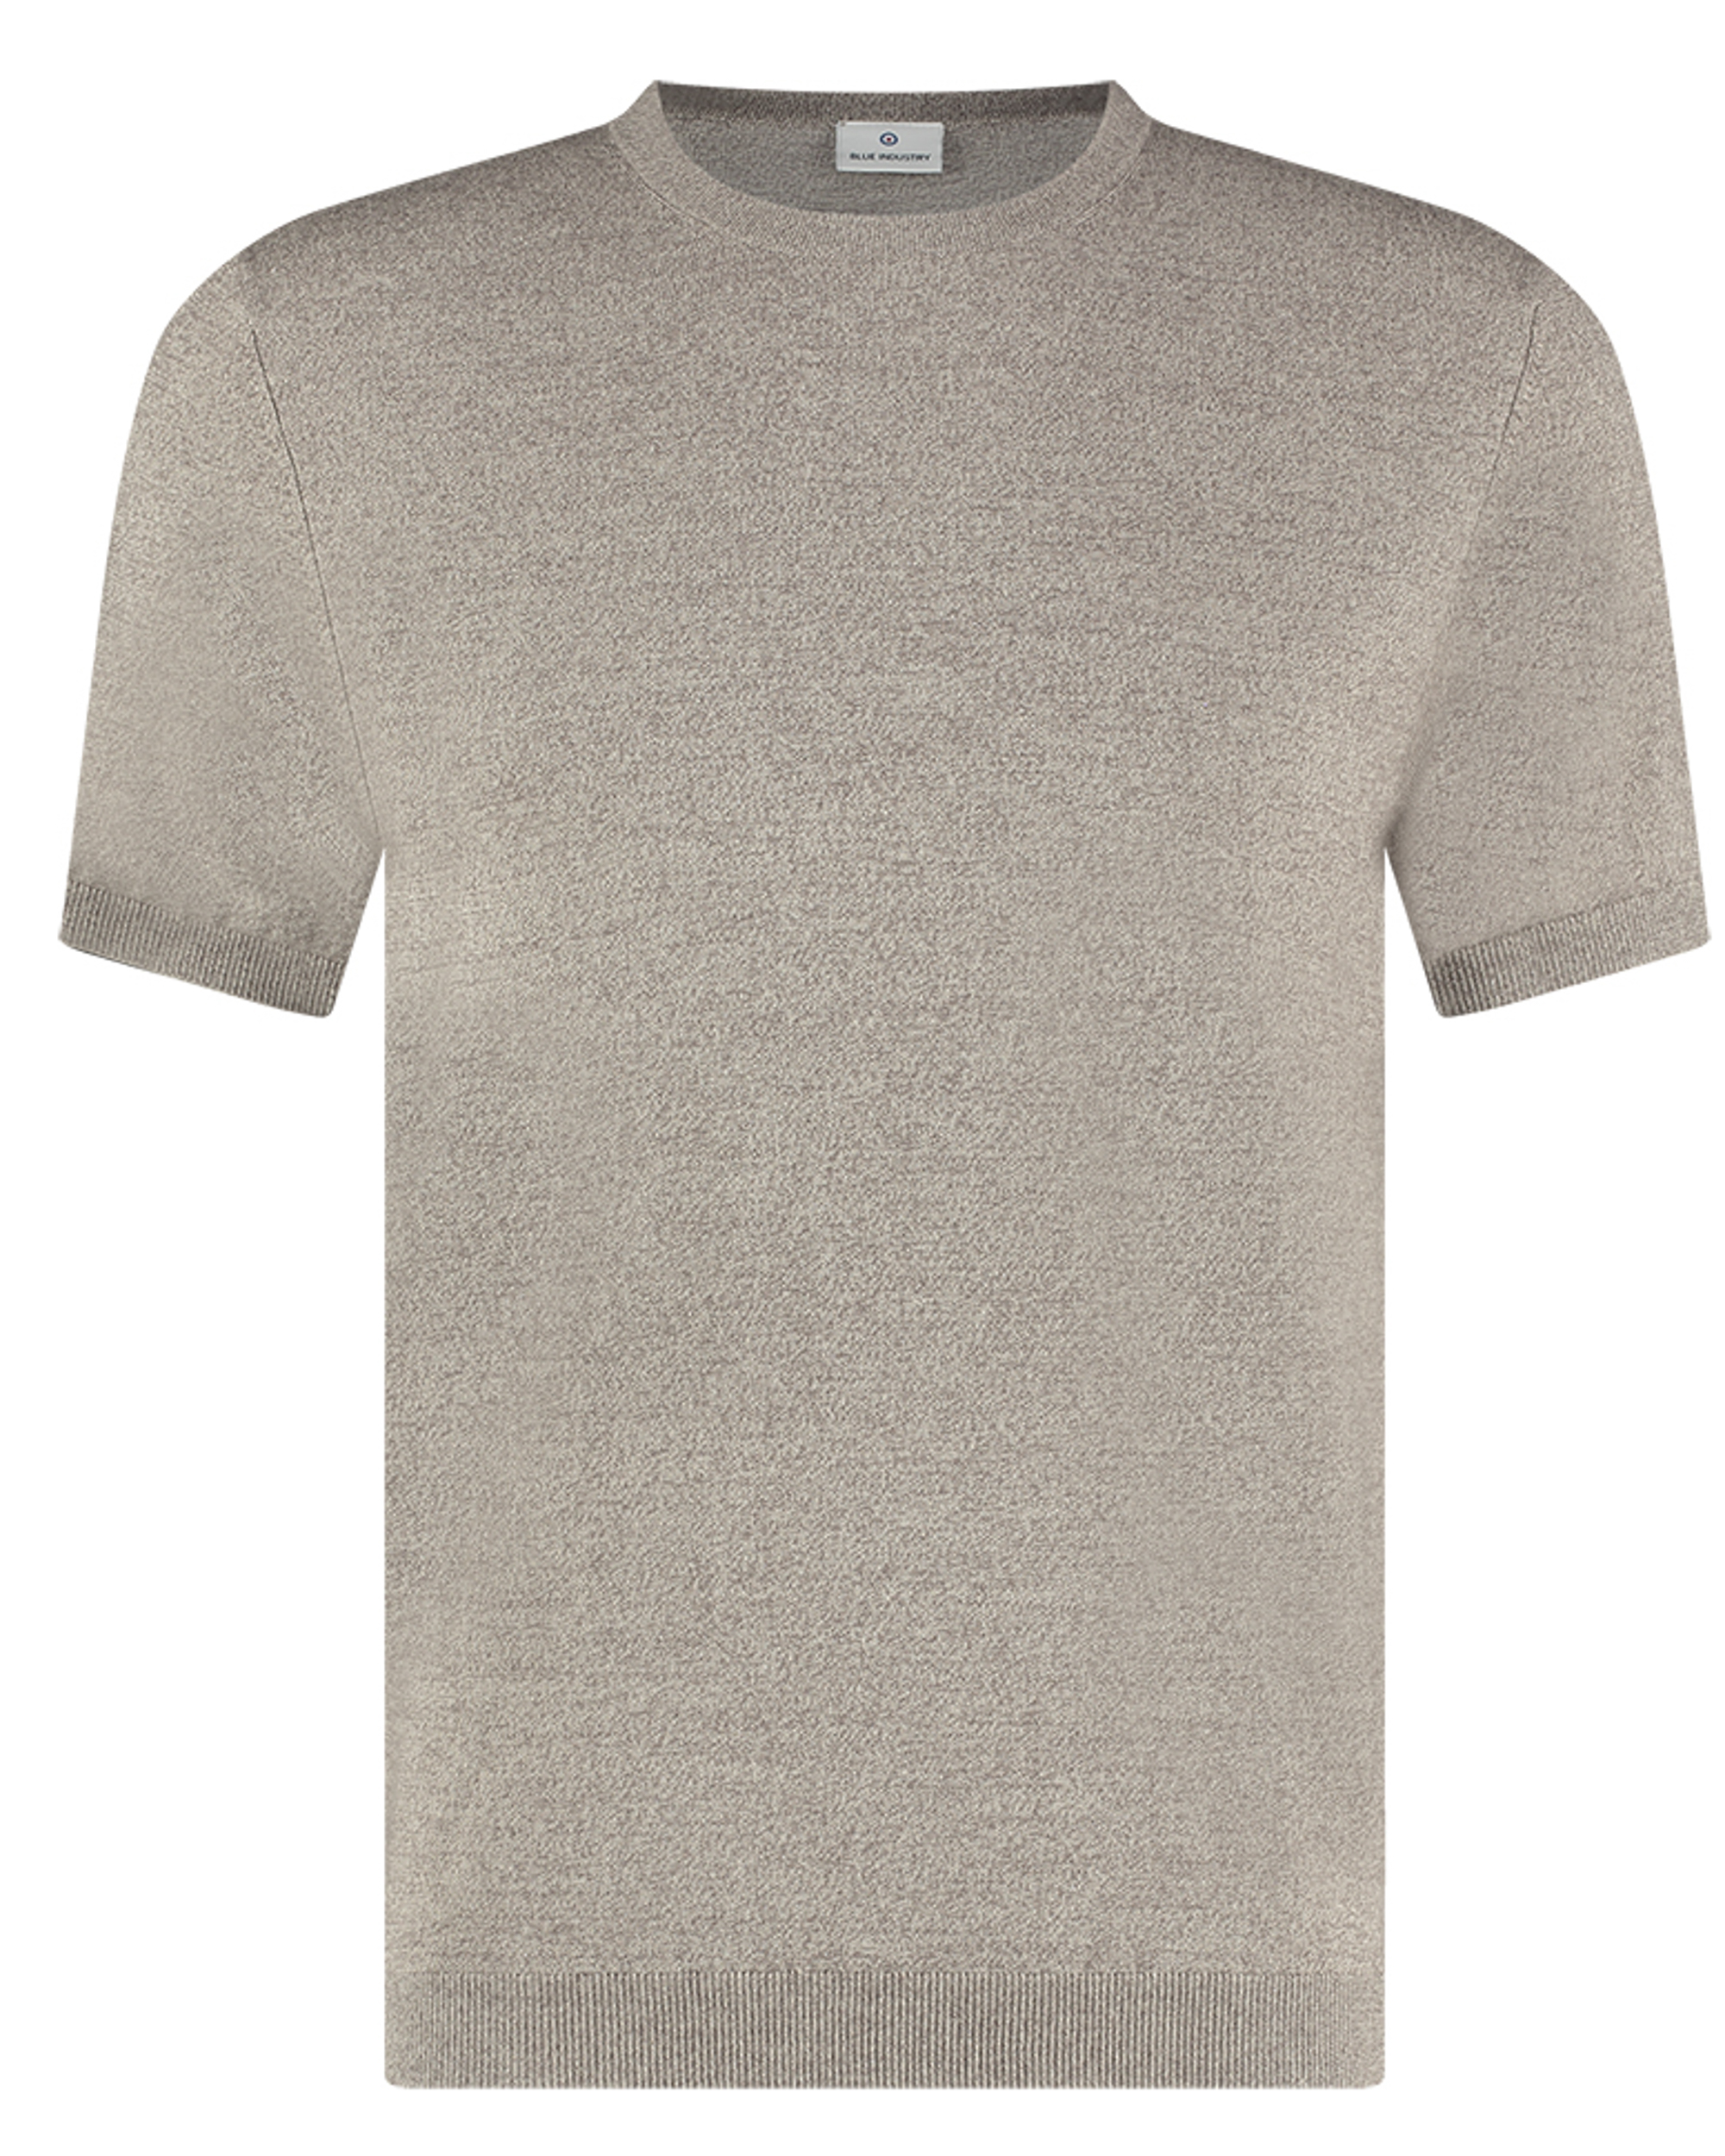 Blue Industry Knitted T-Shirt Melange Taupe